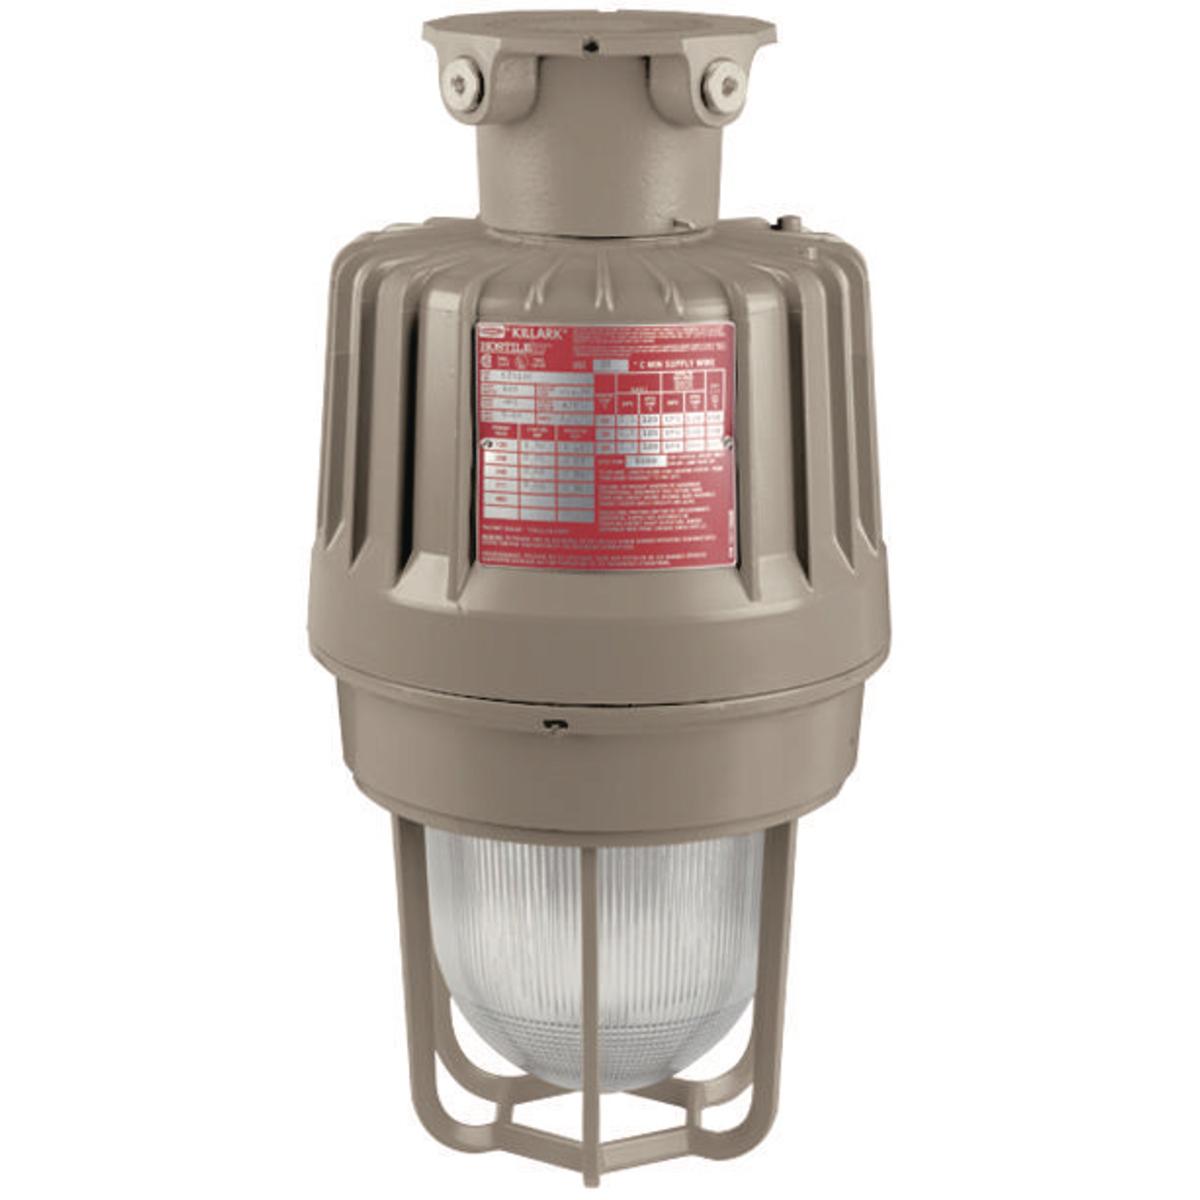 Hubbell EZL10030X2G EZL 120-277V 3/4" Ceiling Mount Fluted Globe with Guard  ; The EZL Series LED High Bay/ Low Bay fixtures are high quality explosion proof light fixtures. Designed to go into the harshest environments where explosive vapors are present .